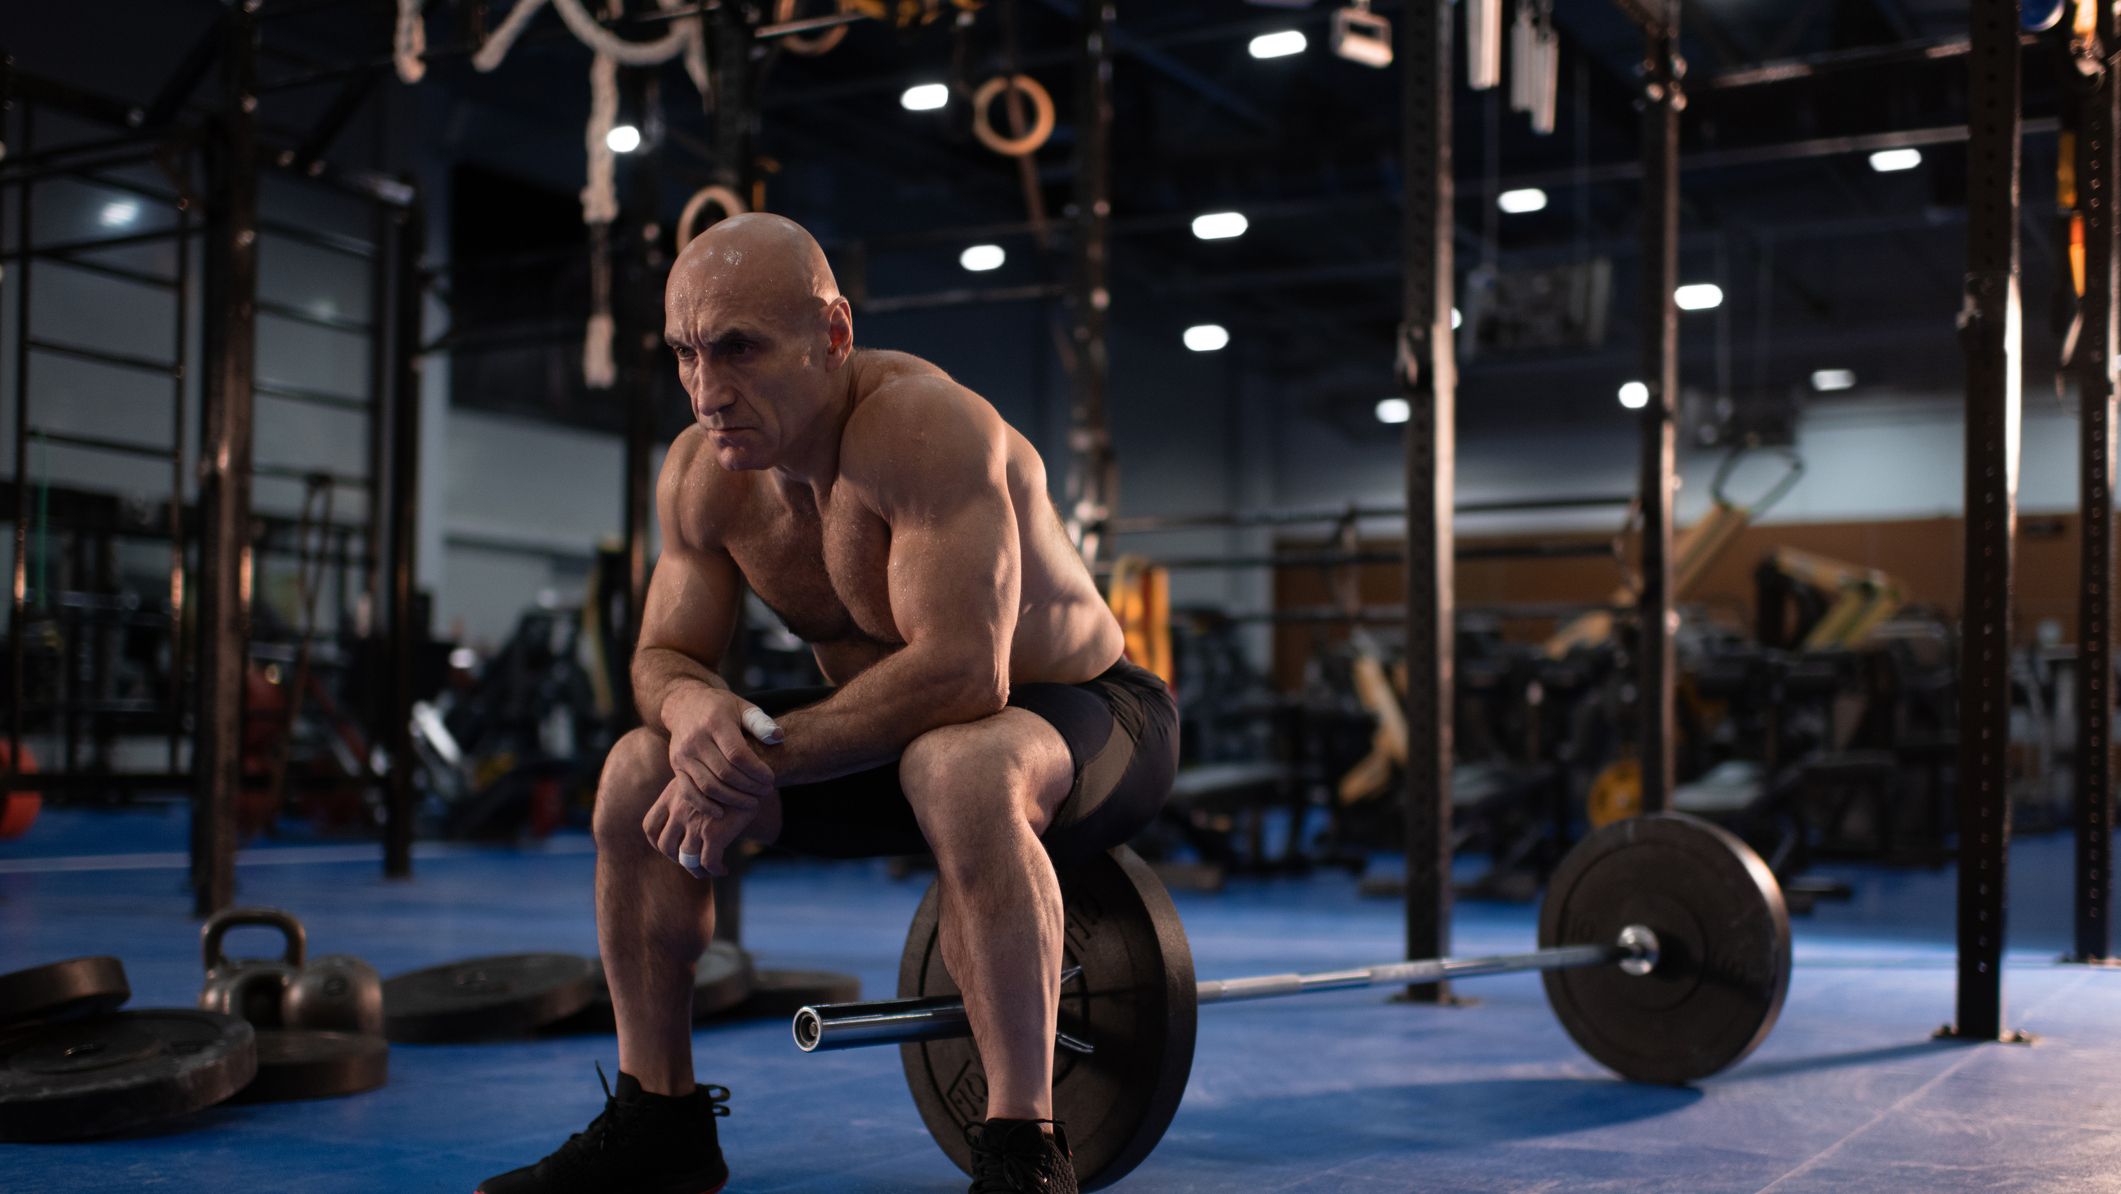 https://hips.hearstapps.com/hmg-prod/images/tired-senior-sportsman-sitting-on-barbell-royalty-free-image-1660600717.jpg?crop=1xw:0.84415xh;center,top